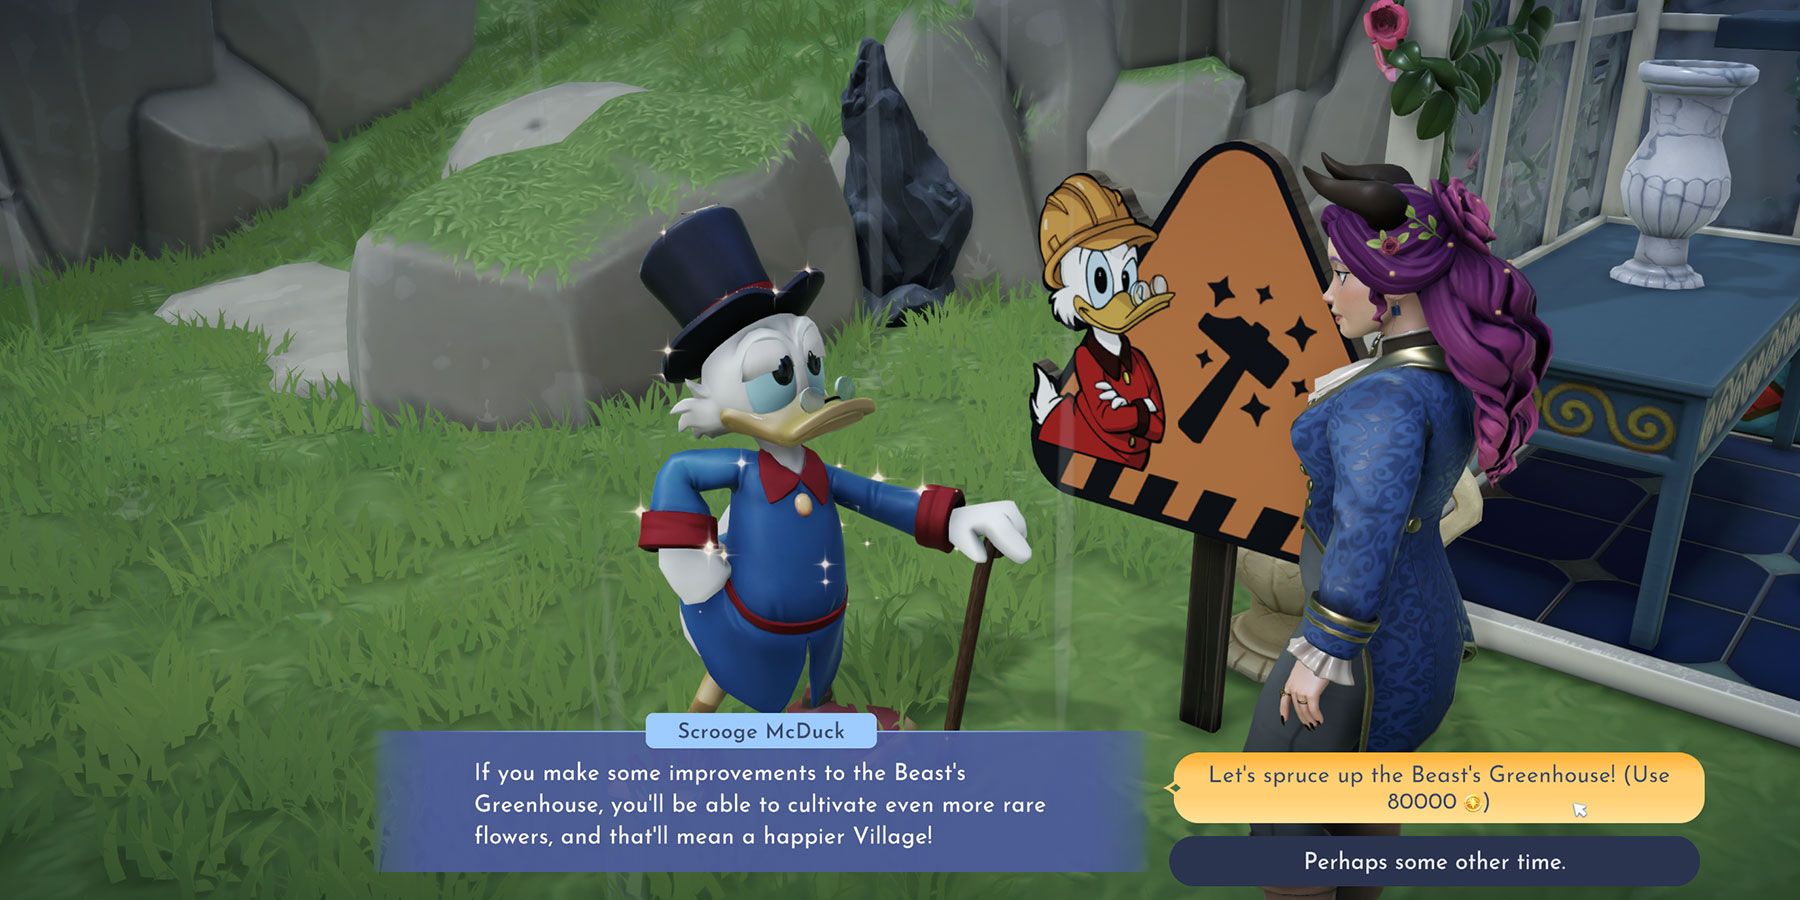 Paying Scrooge McDuck to upgrade The Beast's Greenhouse in Disney Dreamlight Valley.